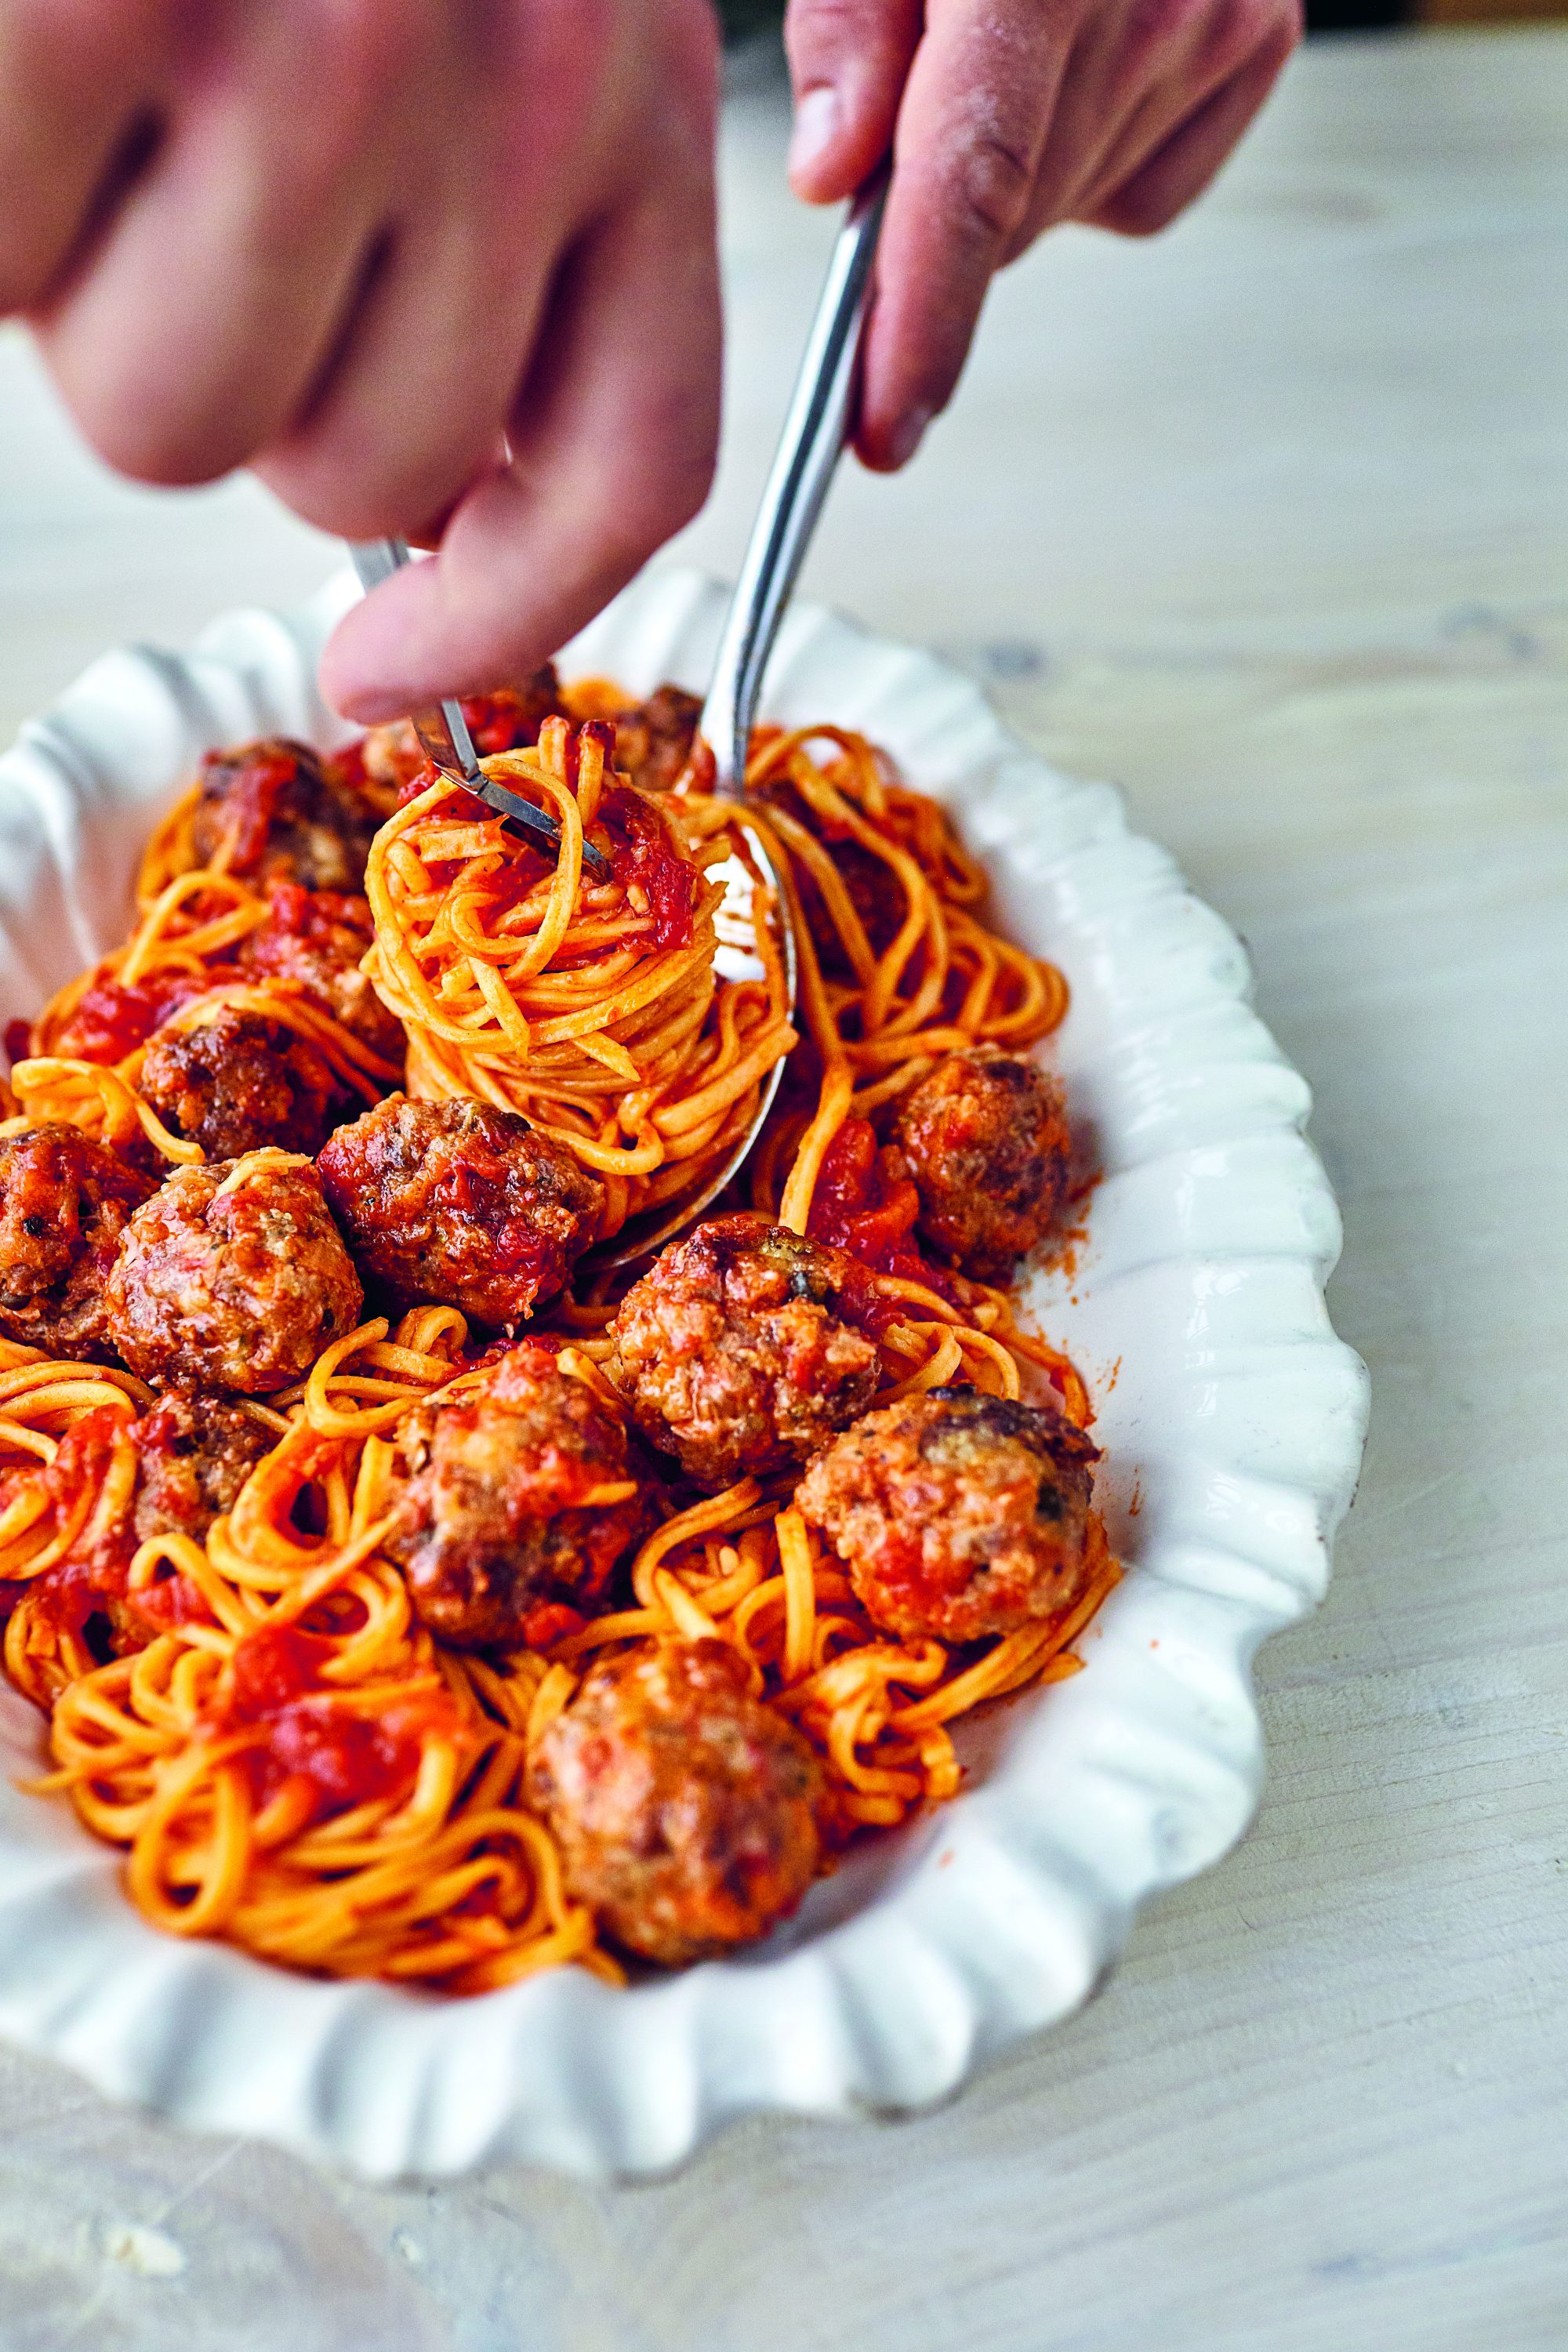 Chitarra with Slow-Cooked Tomato Sauce and Meatballs